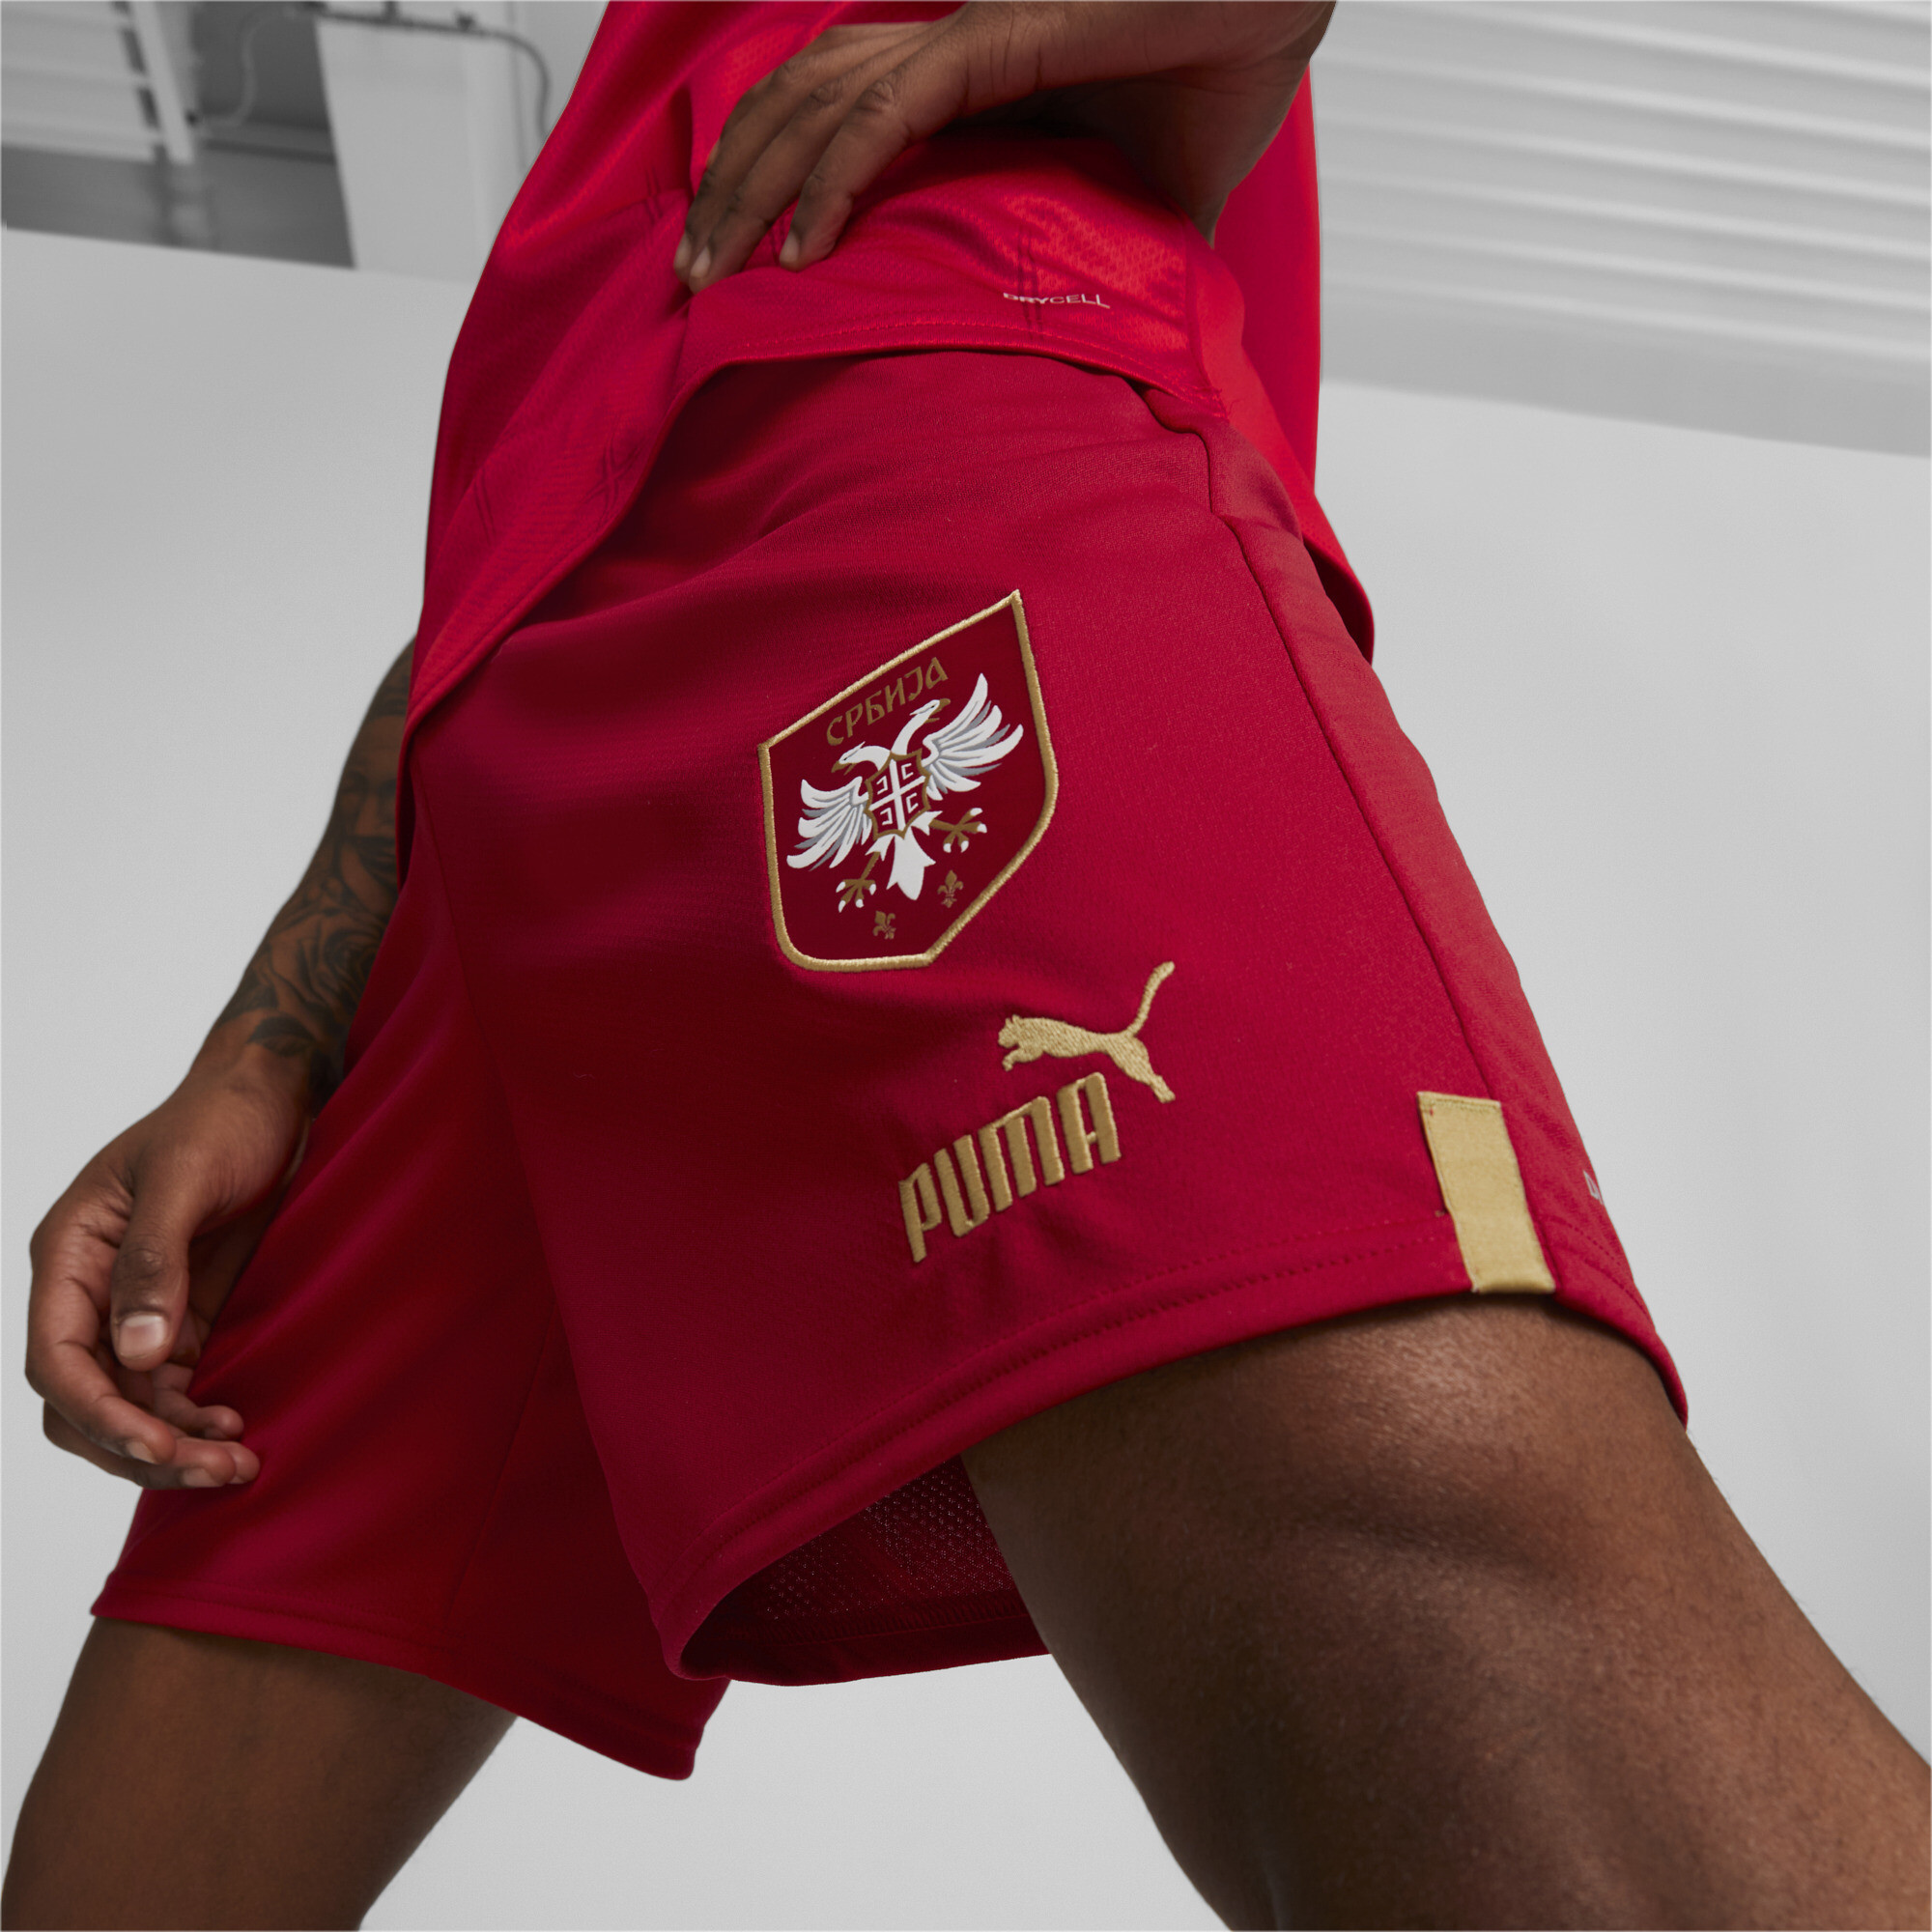 Men's Puma Serbia 22/23 Replica Shorts, Red, Size S, Clothing